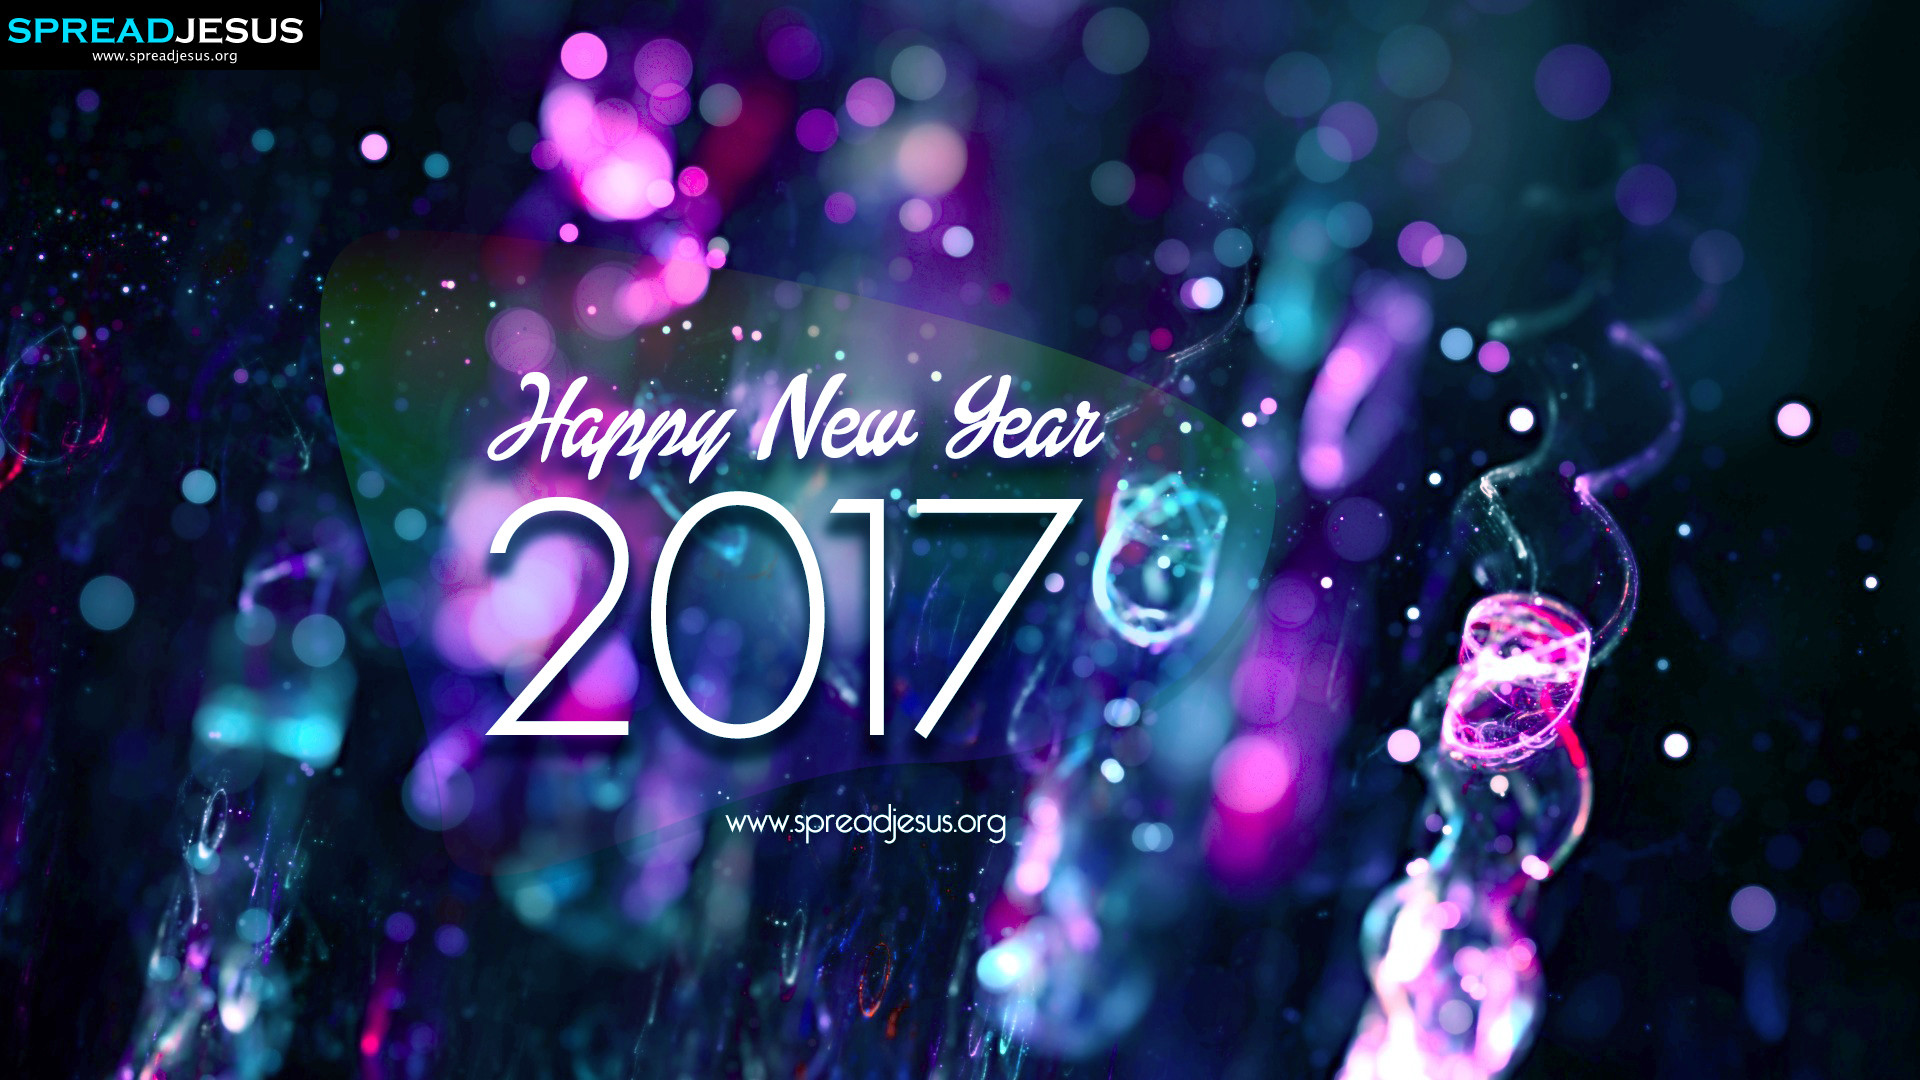 1920x1080 Happy New Year 2017 Greetings Wishes HD-Wallpapers Free  DownlOADING-spreadjesus.org